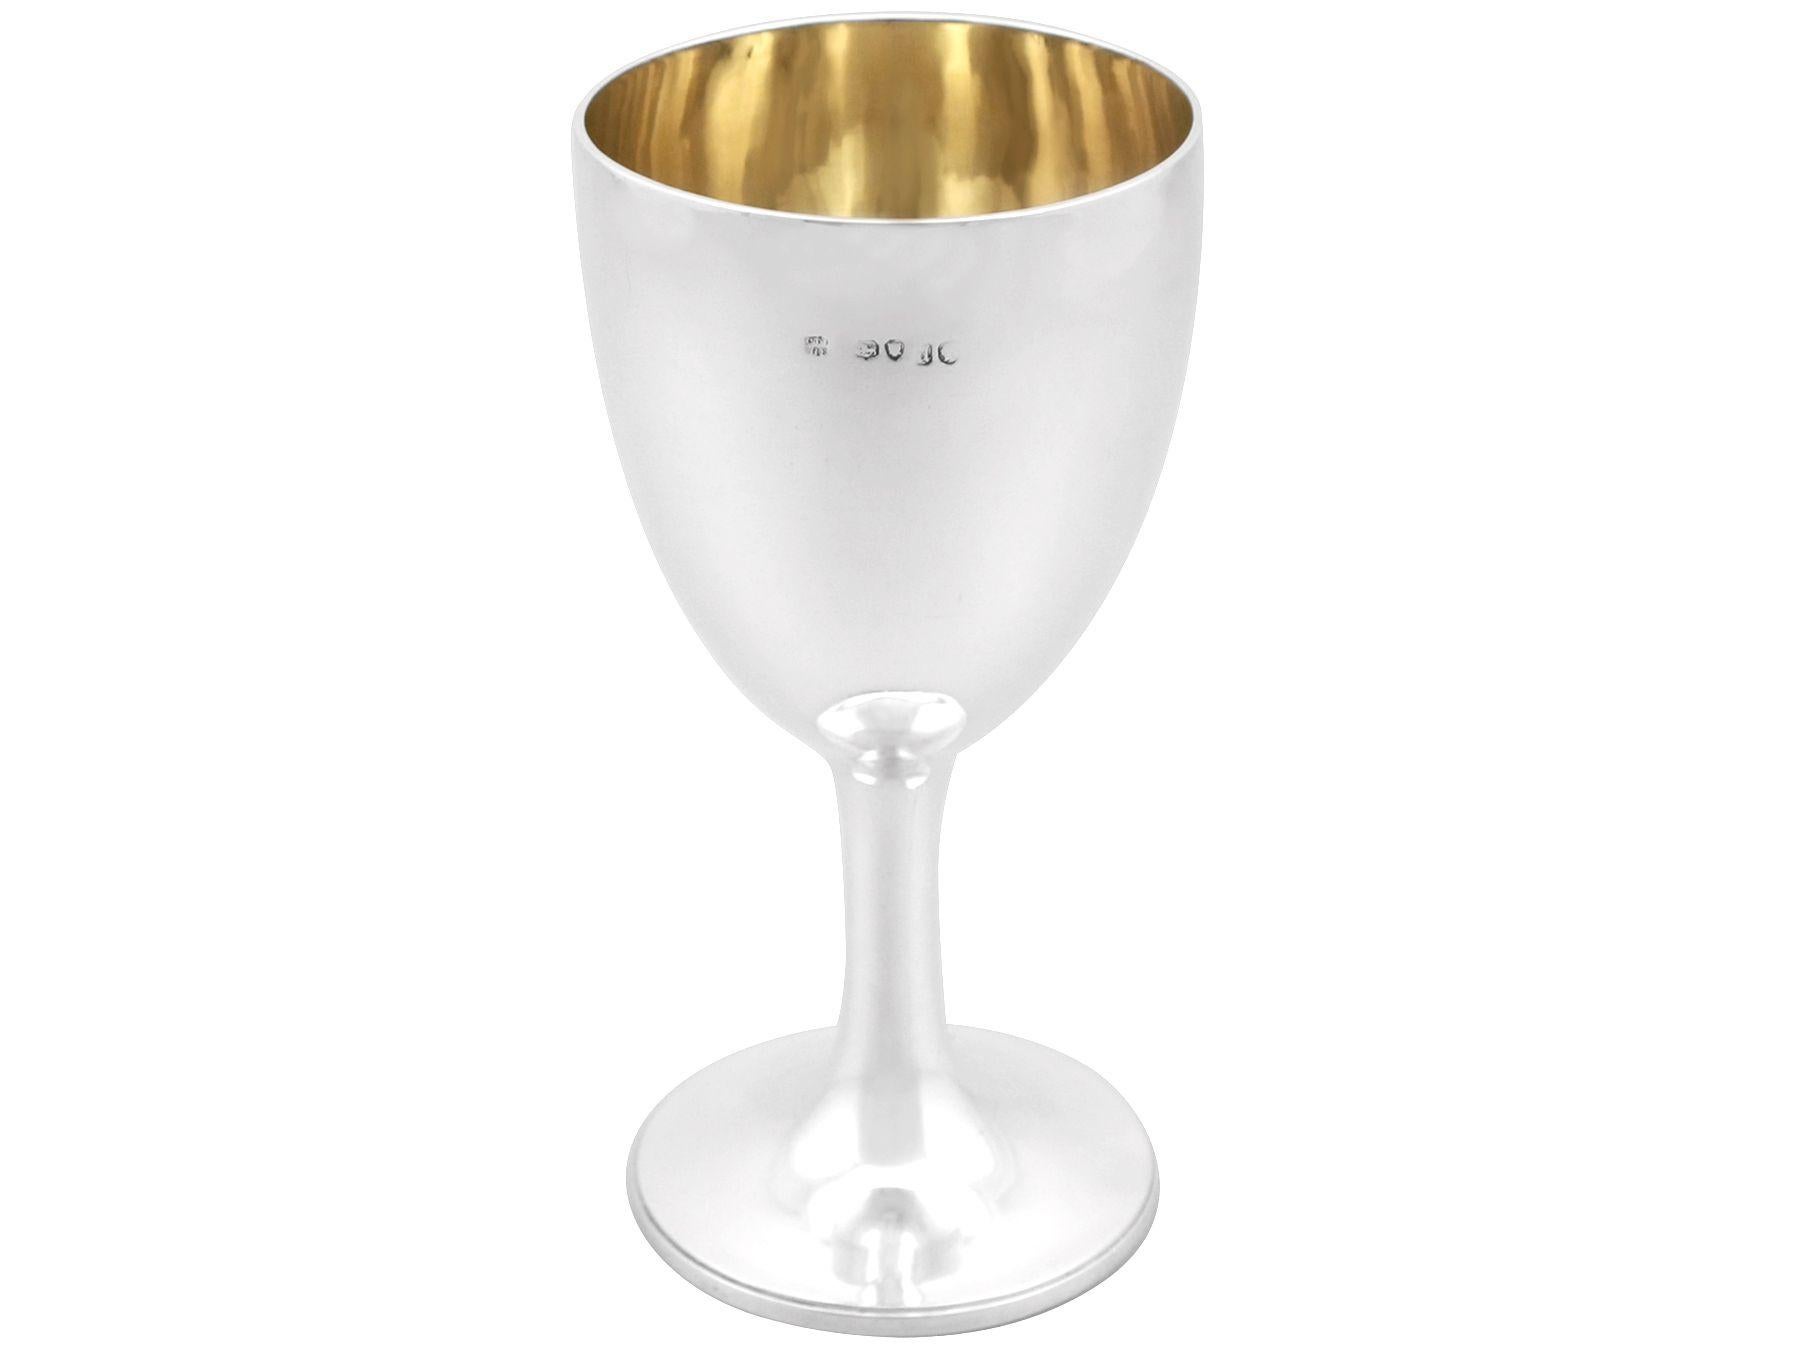 An exceptional, fine and impressive antique Victorian English sterling silver goblet made by Charles Thomas Fox & George Fox; an addition to our wine and drinks related silverware collection.

This exceptional antique Victorian sterling silver